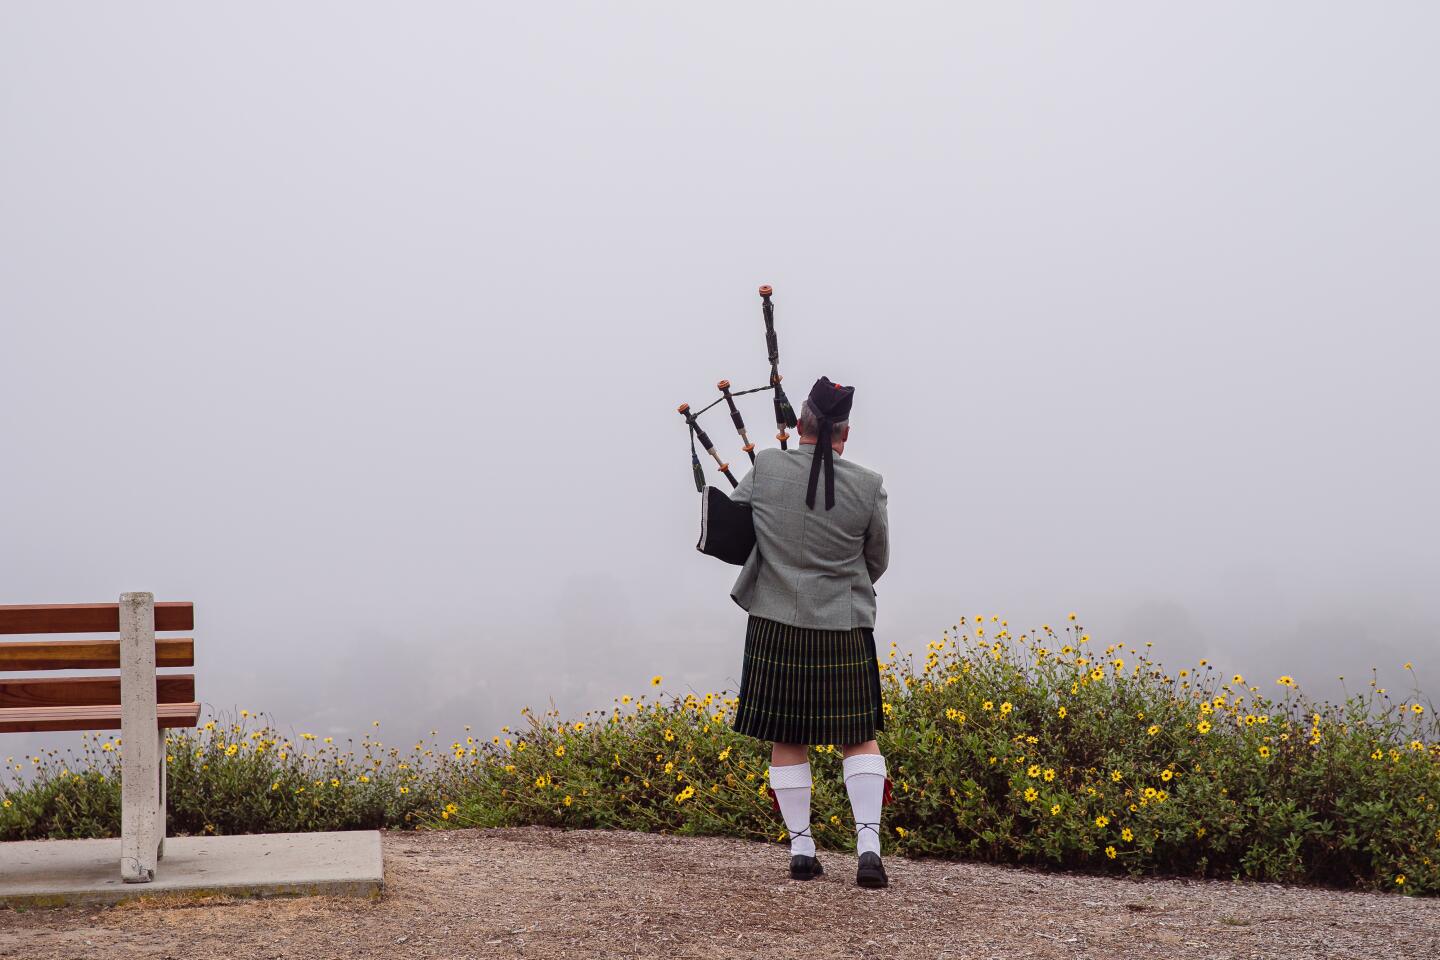 Ian Kelly plays music on his bagpipes at Mt. Soledad National Veterans Memorial.